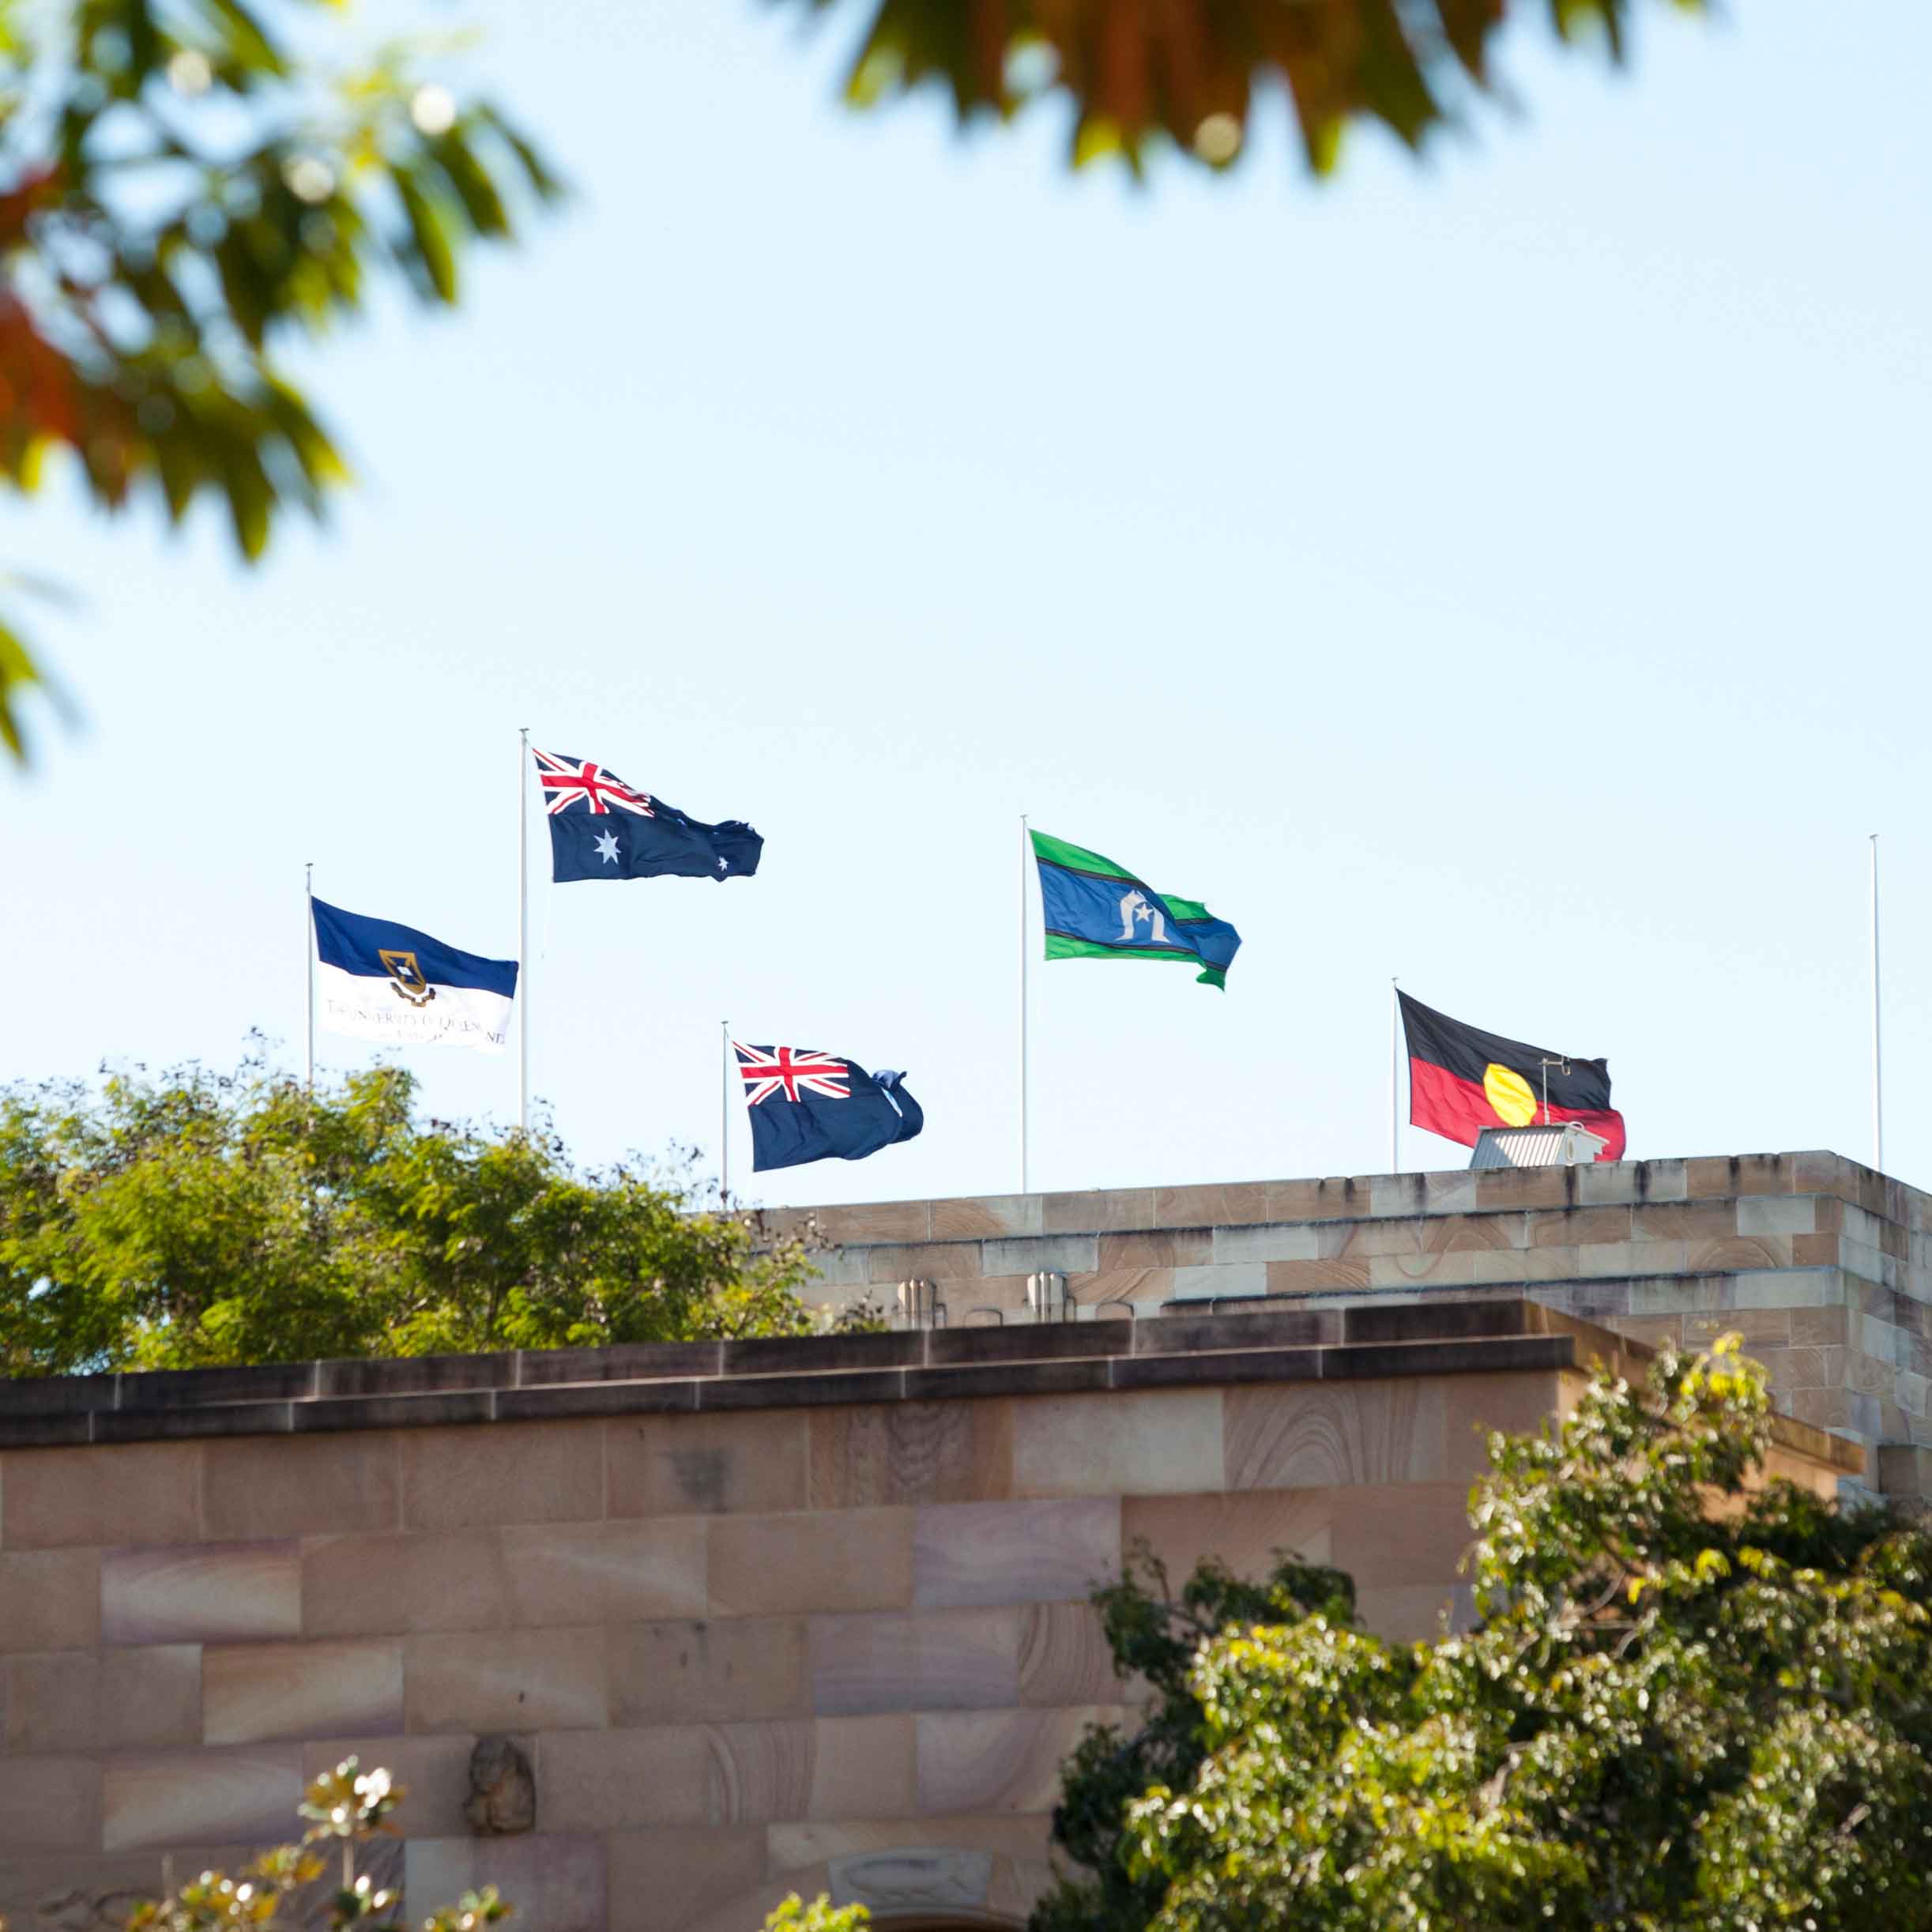 This is an image of several flags on the roof of the Forgan Smith building at UQ